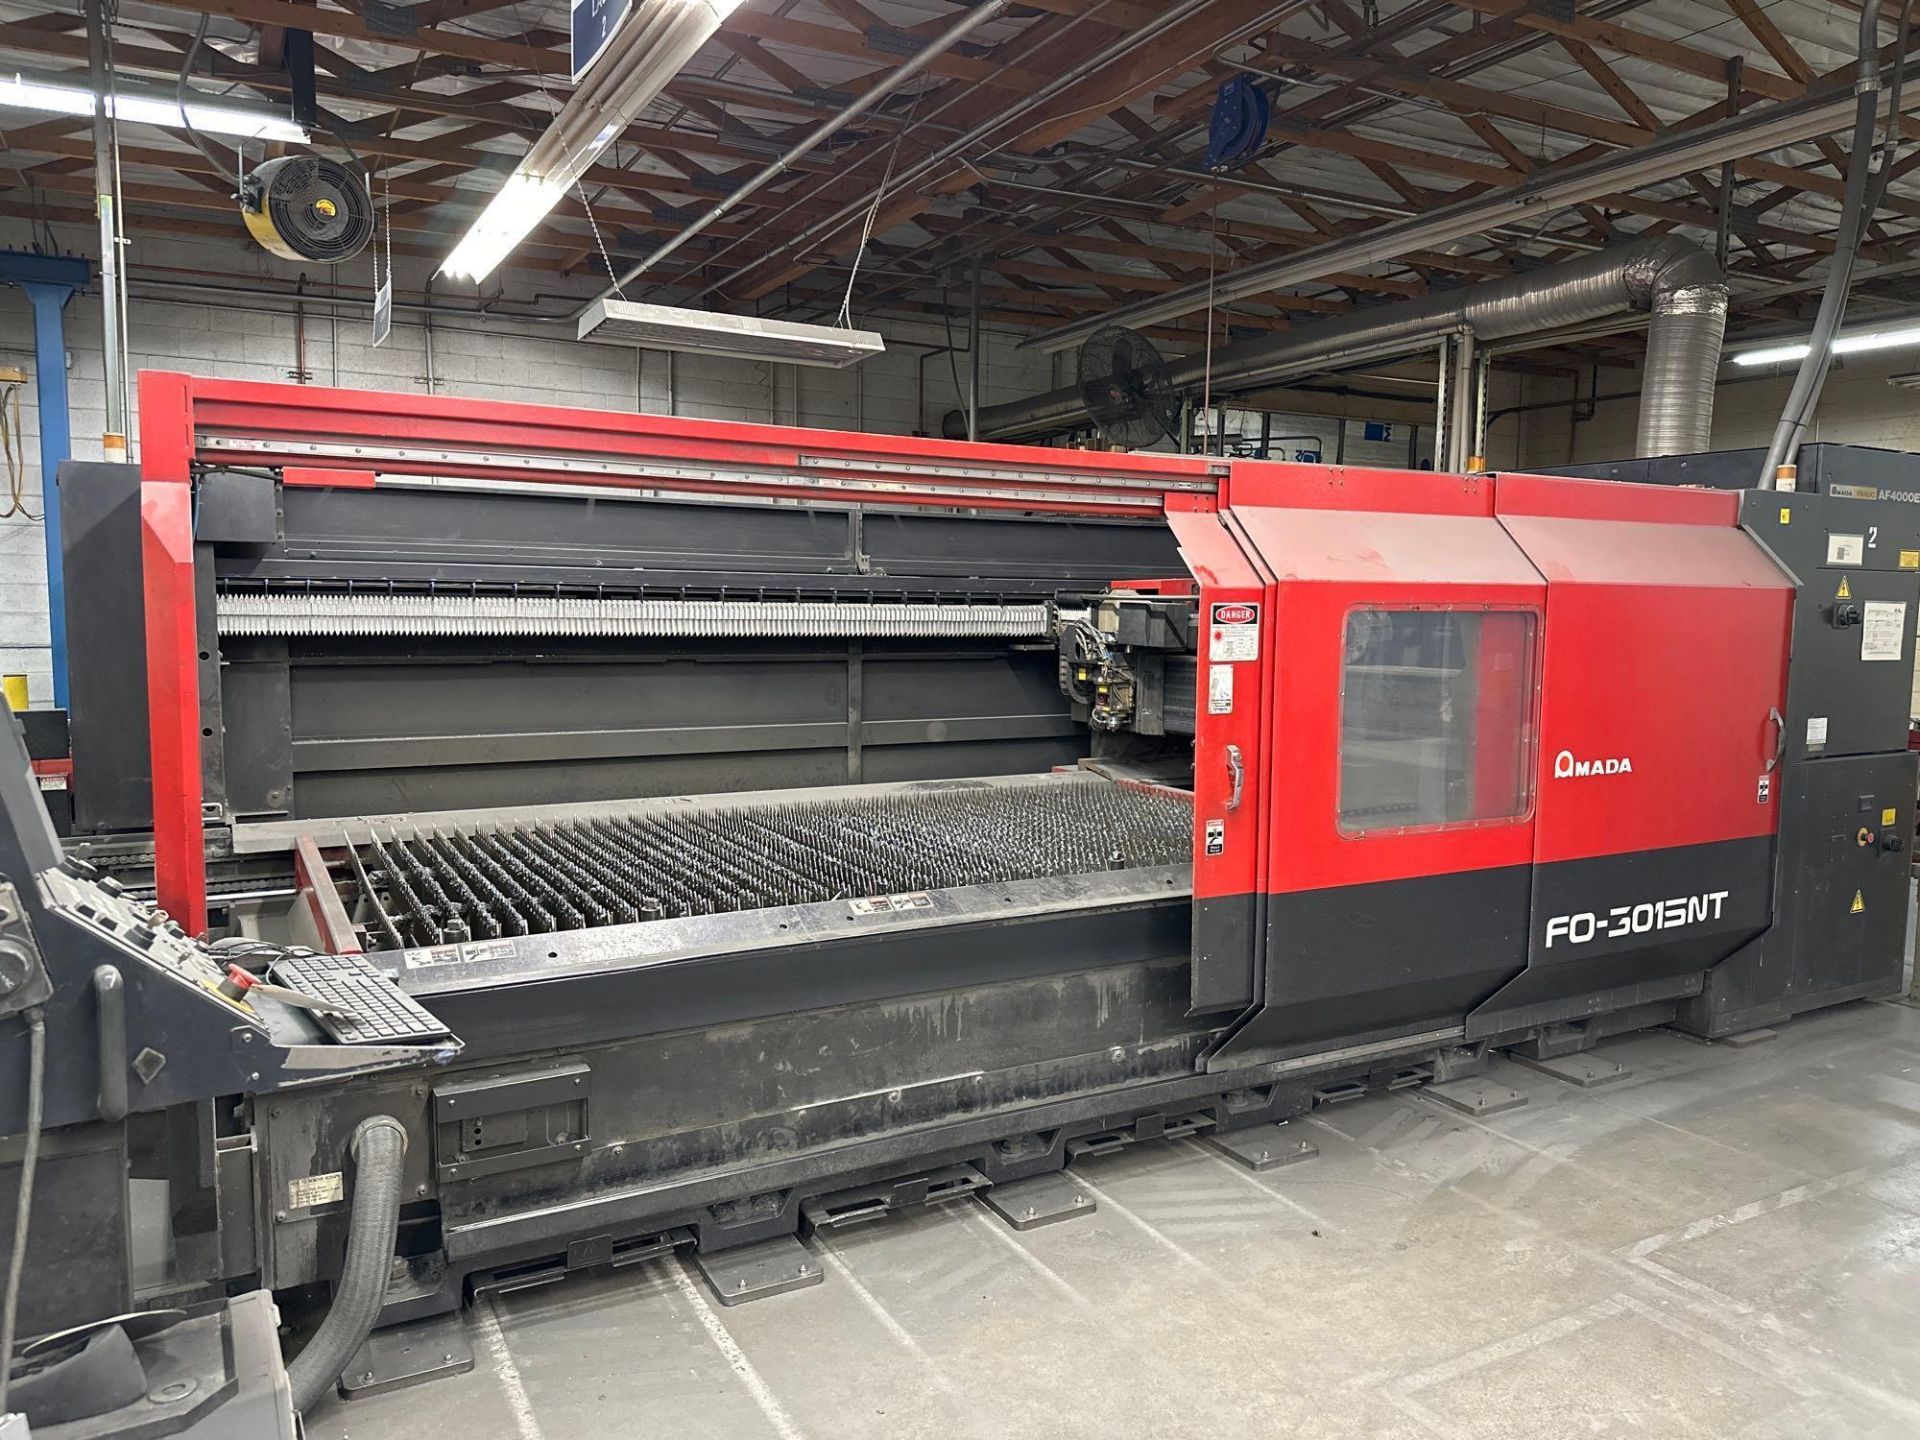 4000W AMADA FO-3015NT CO2 LASER, 2005 - 5' X 10' TABLE - INCLUDES DONALDSON TORIT DUST COLLECTOR - Image 4 of 23